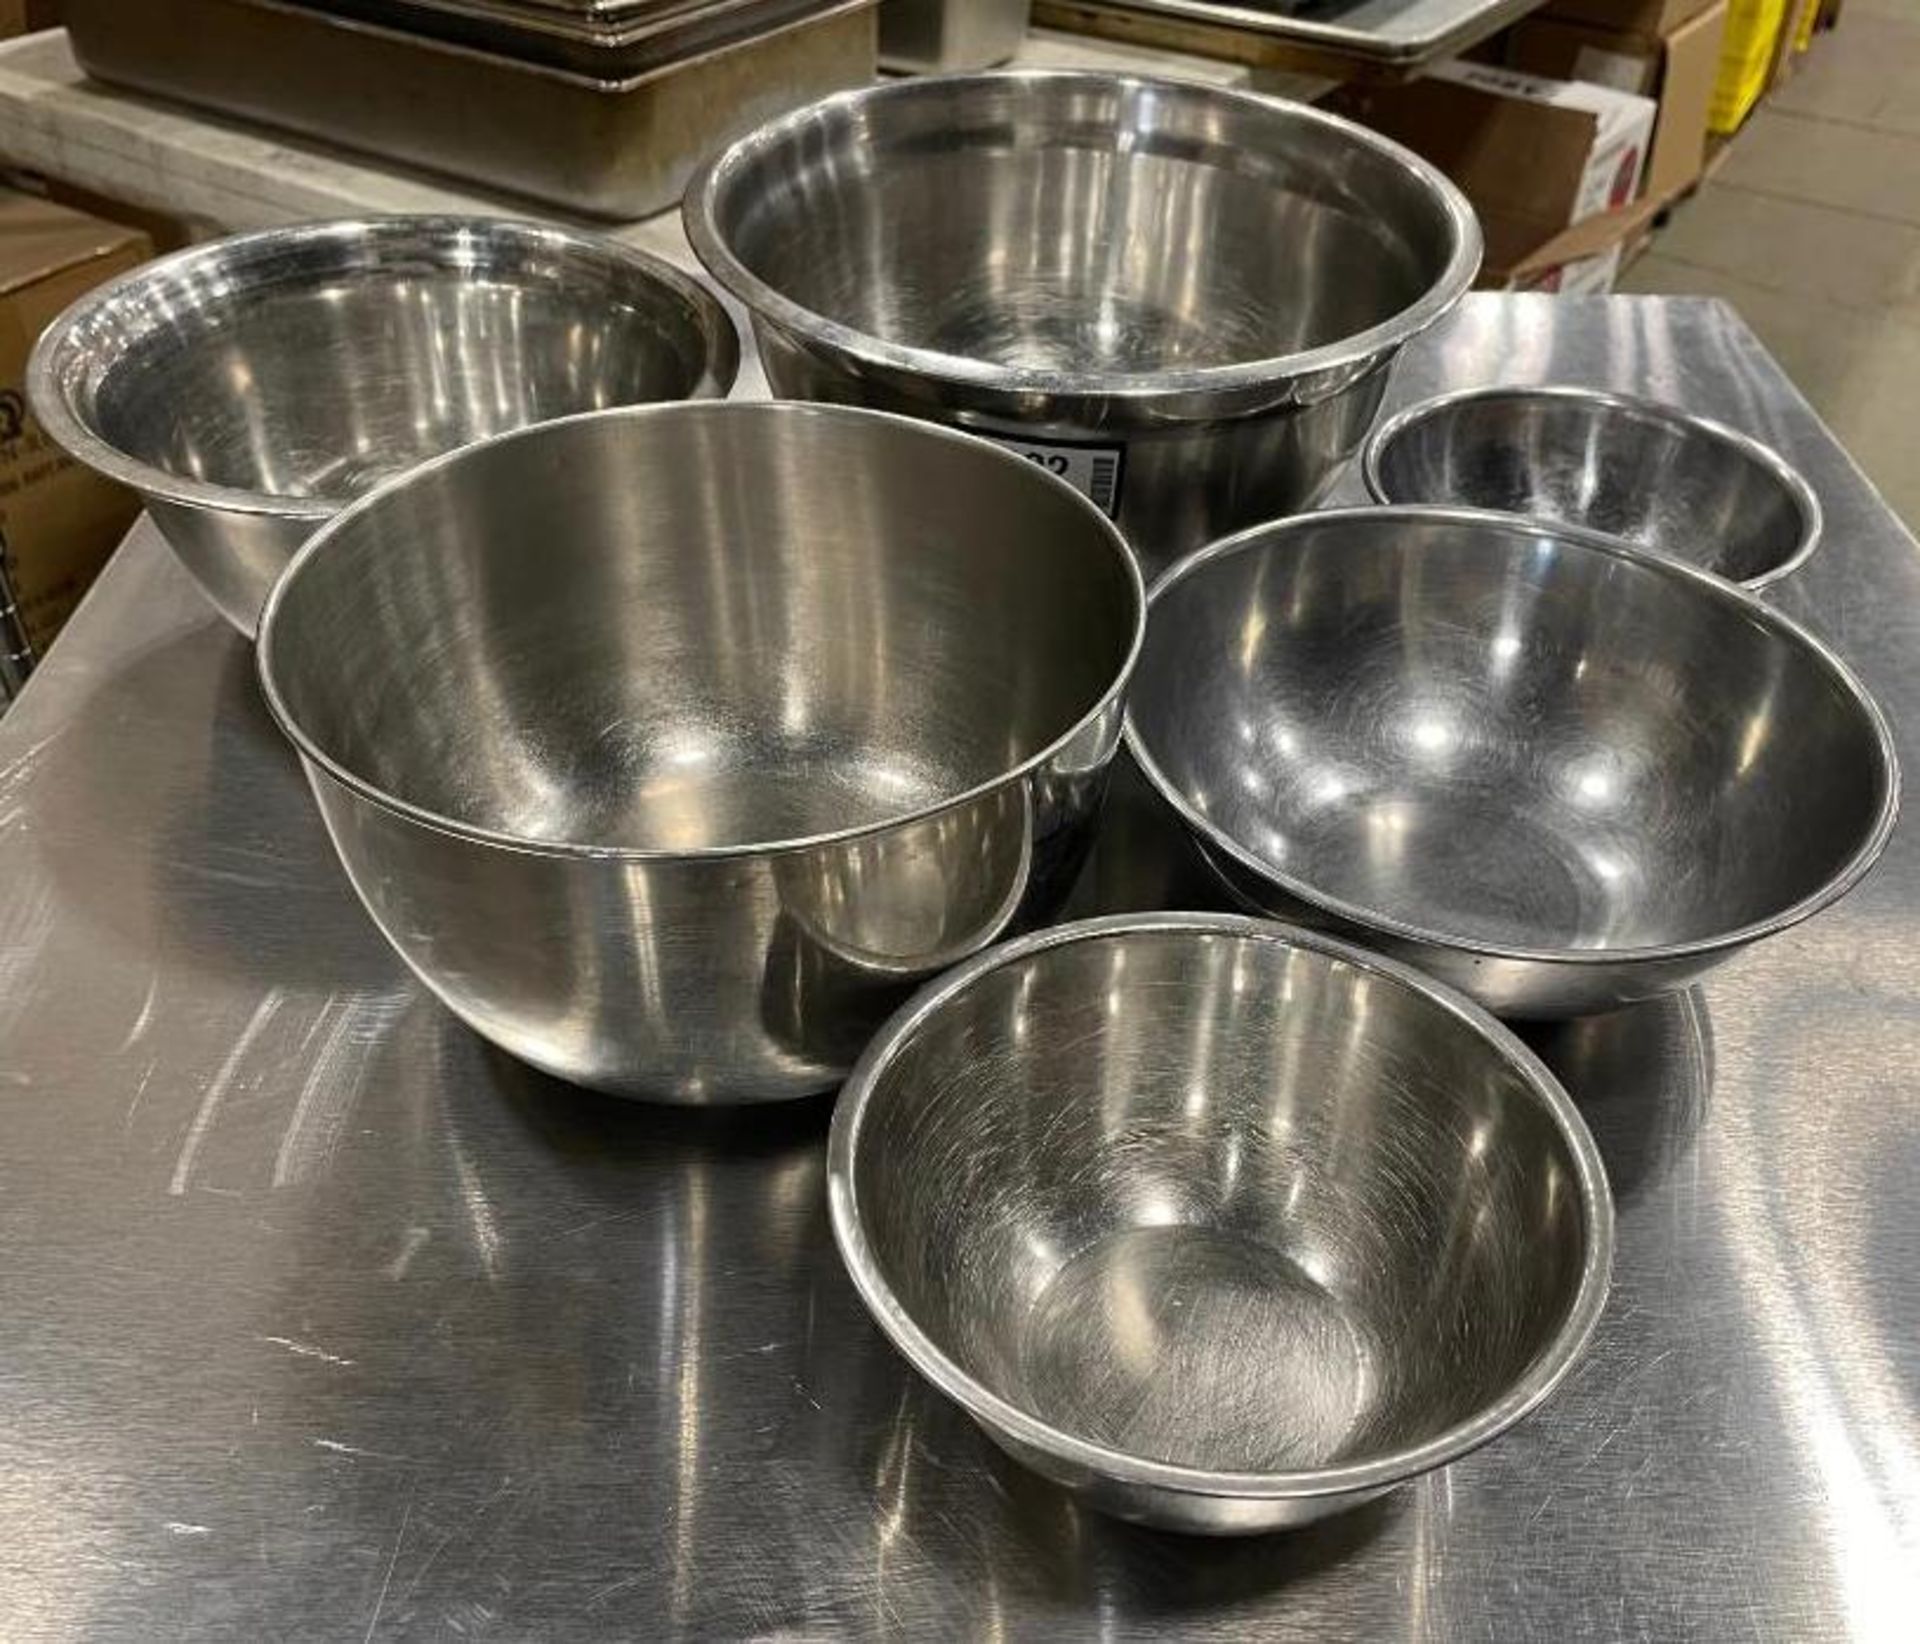 (5) ASSORTED SIZE STAINLESS STEEL MIXING BOWLS